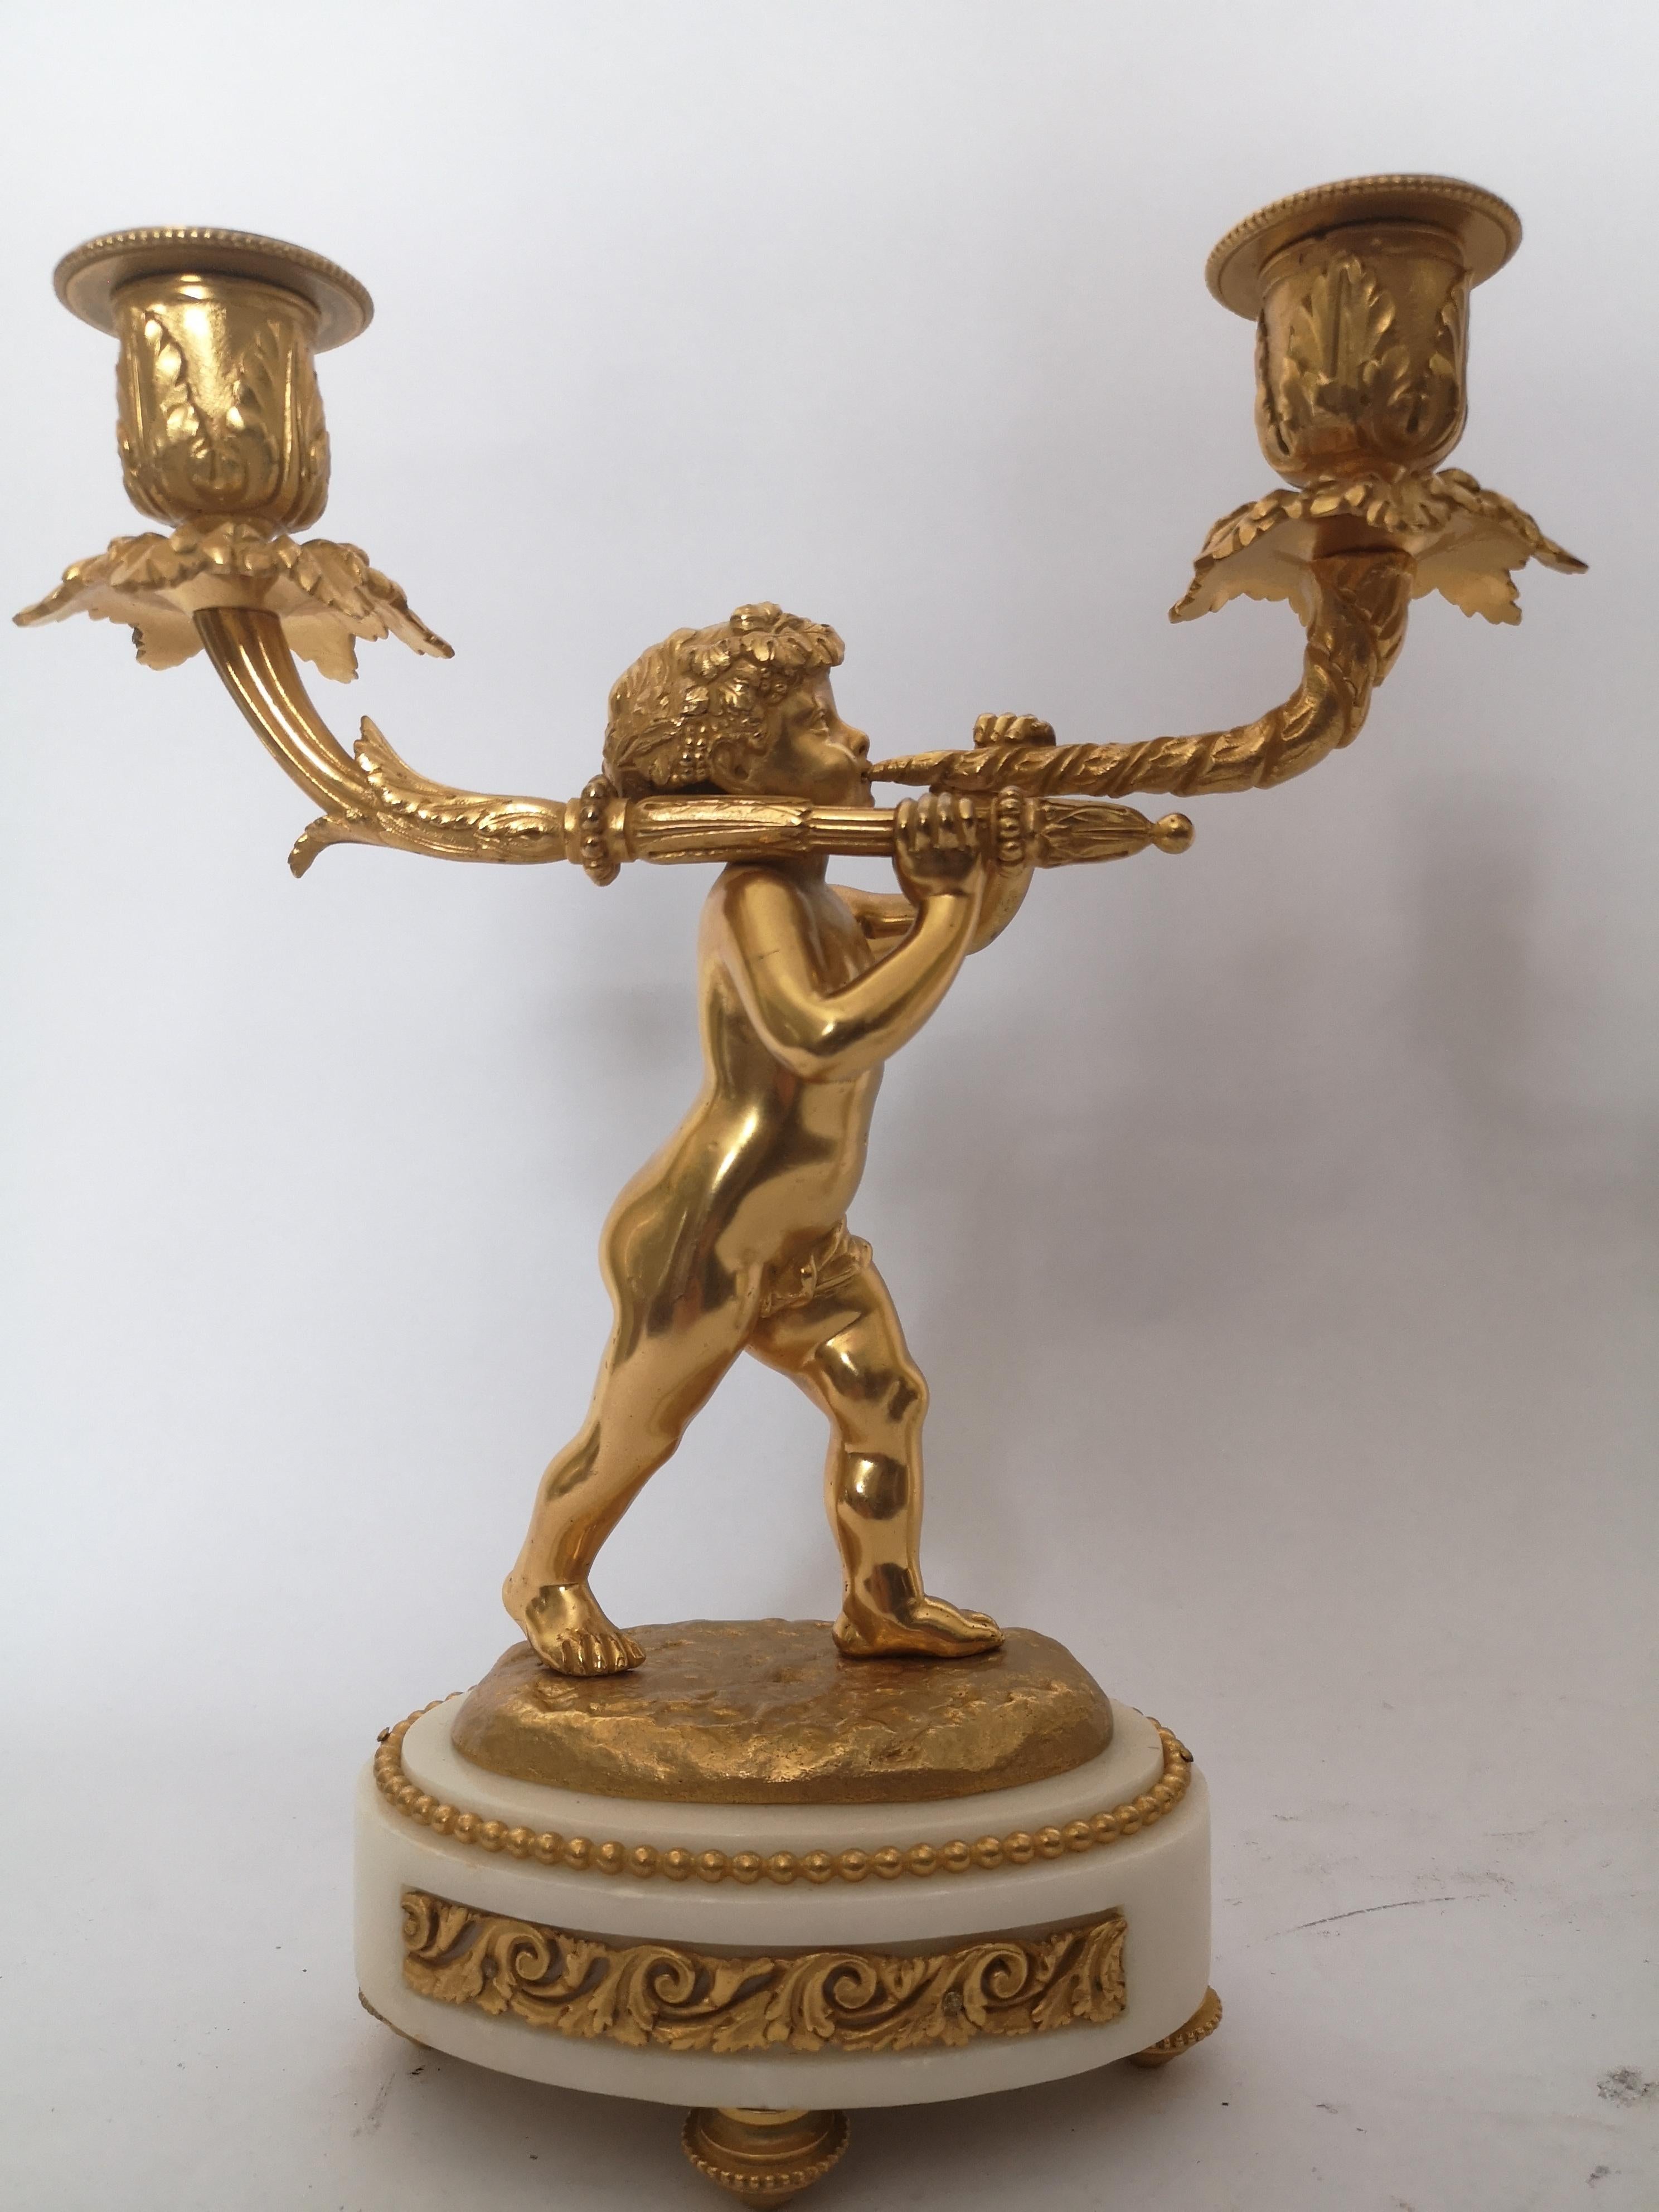 An unusual pair of 19th century French candlesticks. The single holder in the form of a gilt flower, flanked by two more gilt flowers each side, the branches in patinated bronze and resting in an engraved gilt bronze vase. On a white marble